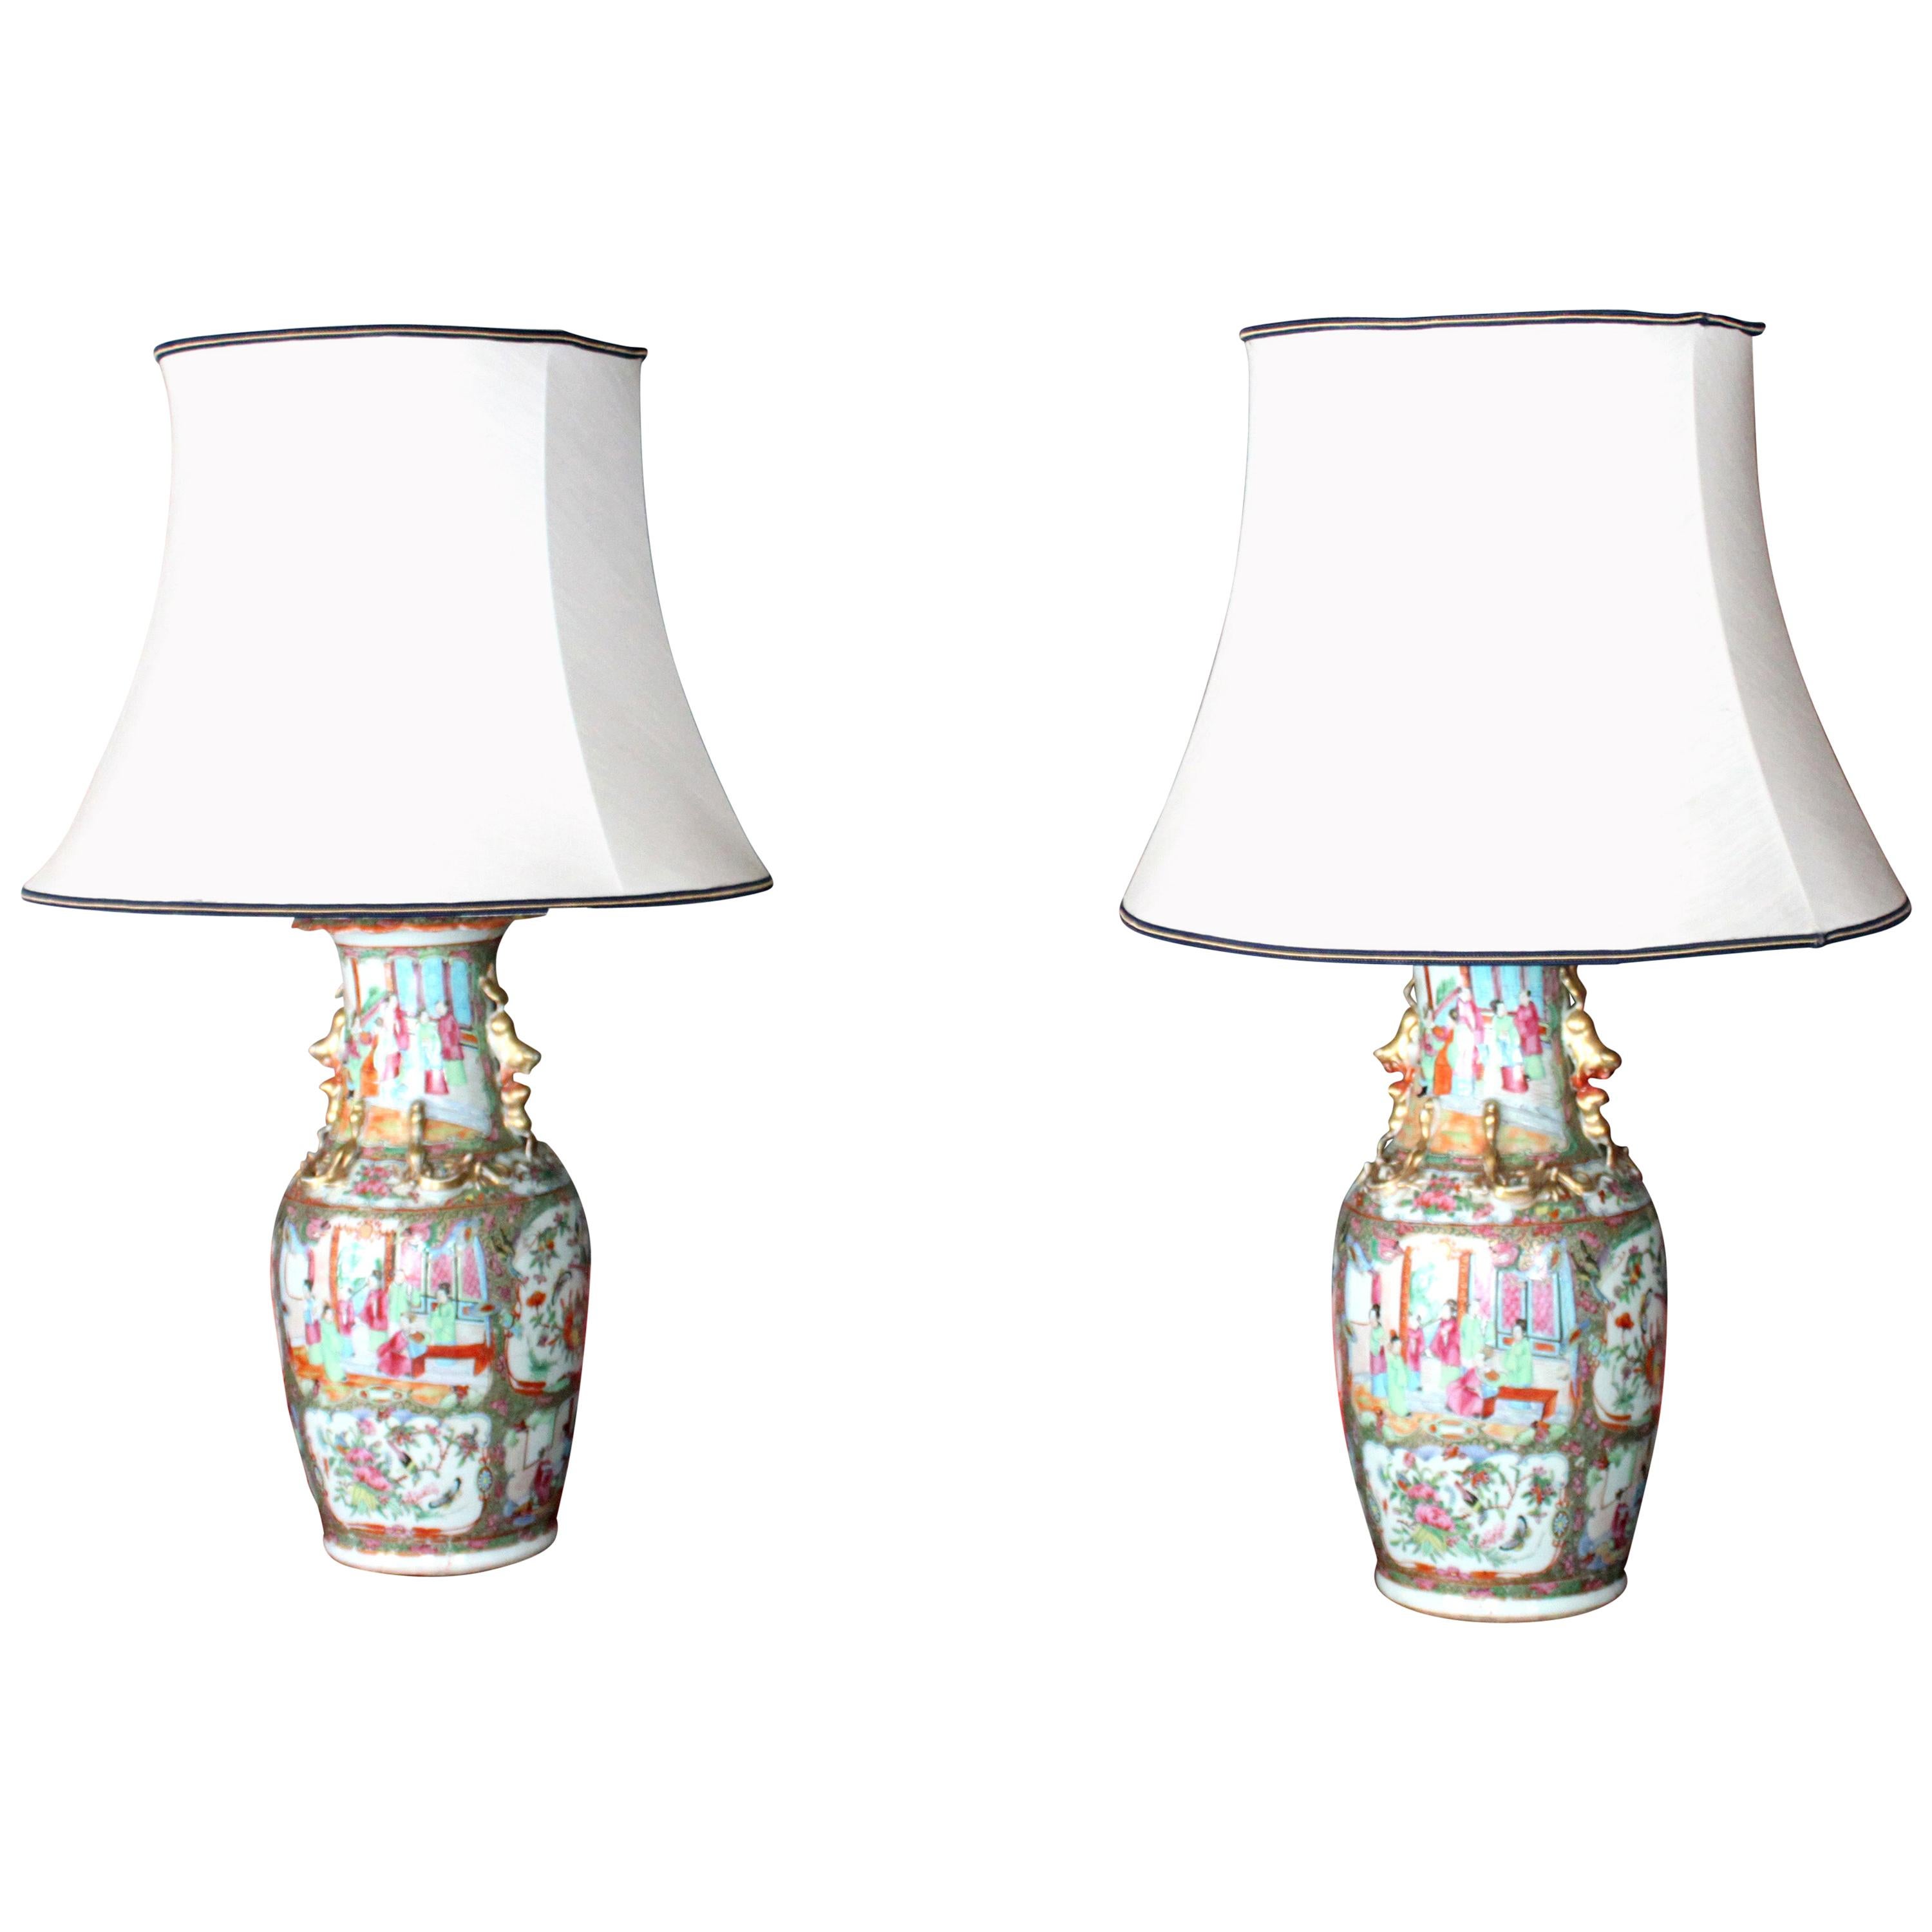 Pair of Canton Vases Now as Lamps